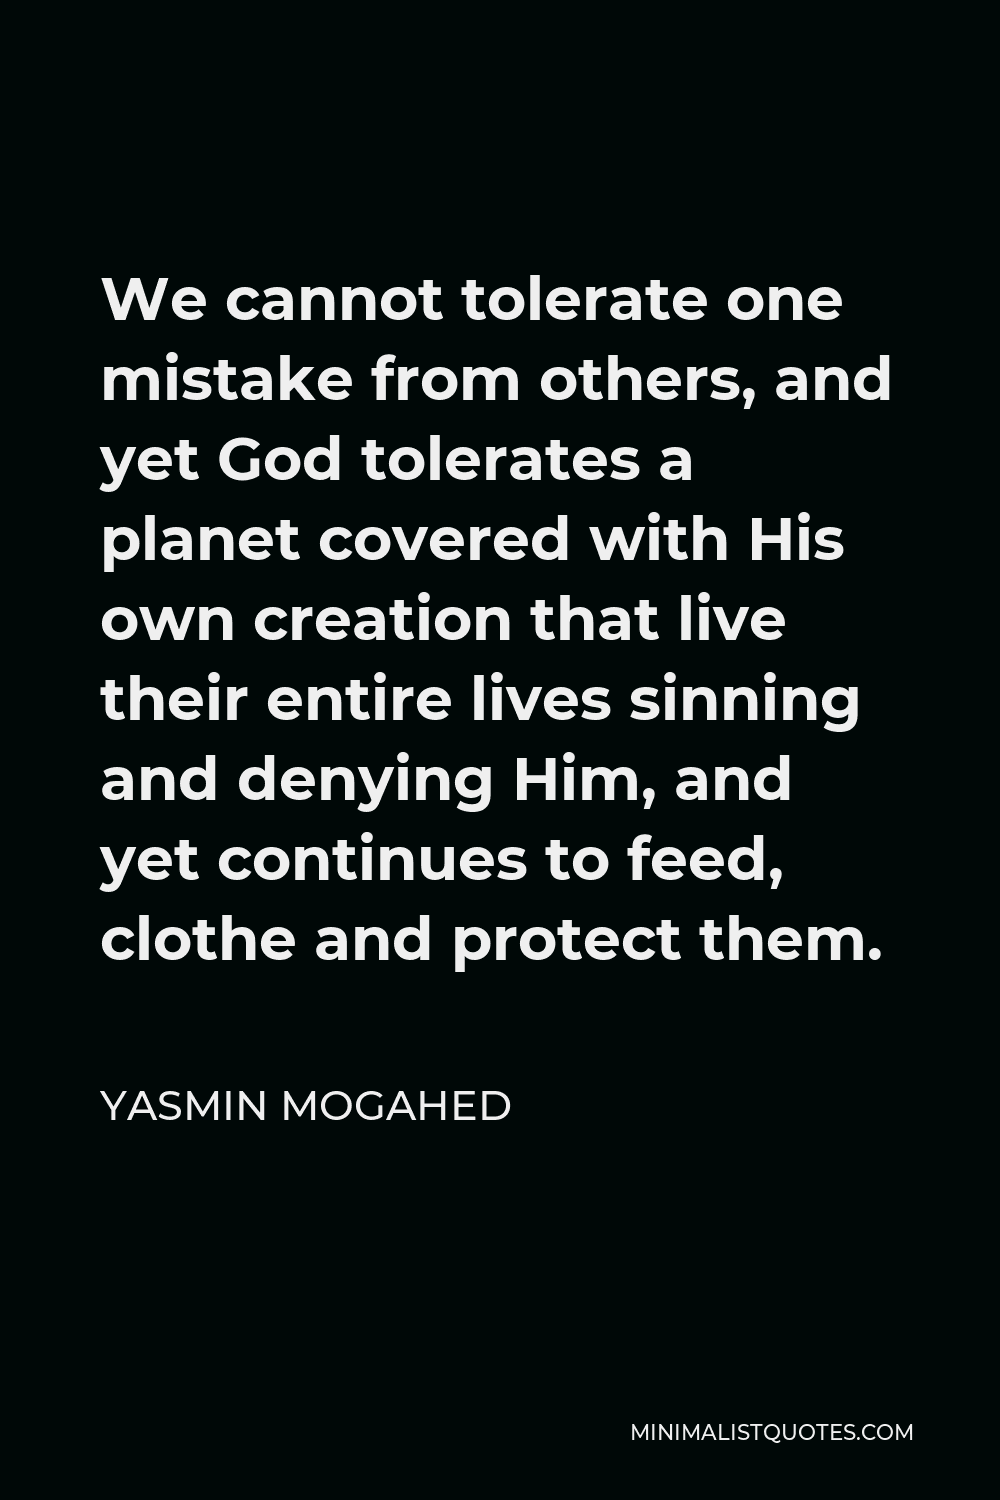 Yasmin Mogahed Quote - We cannot tolerate one mistake from others, and yet God tolerates a planet covered with His own creation that live their entire lives sinning and denying Him, and yet continues to feed, clothe and protect them.